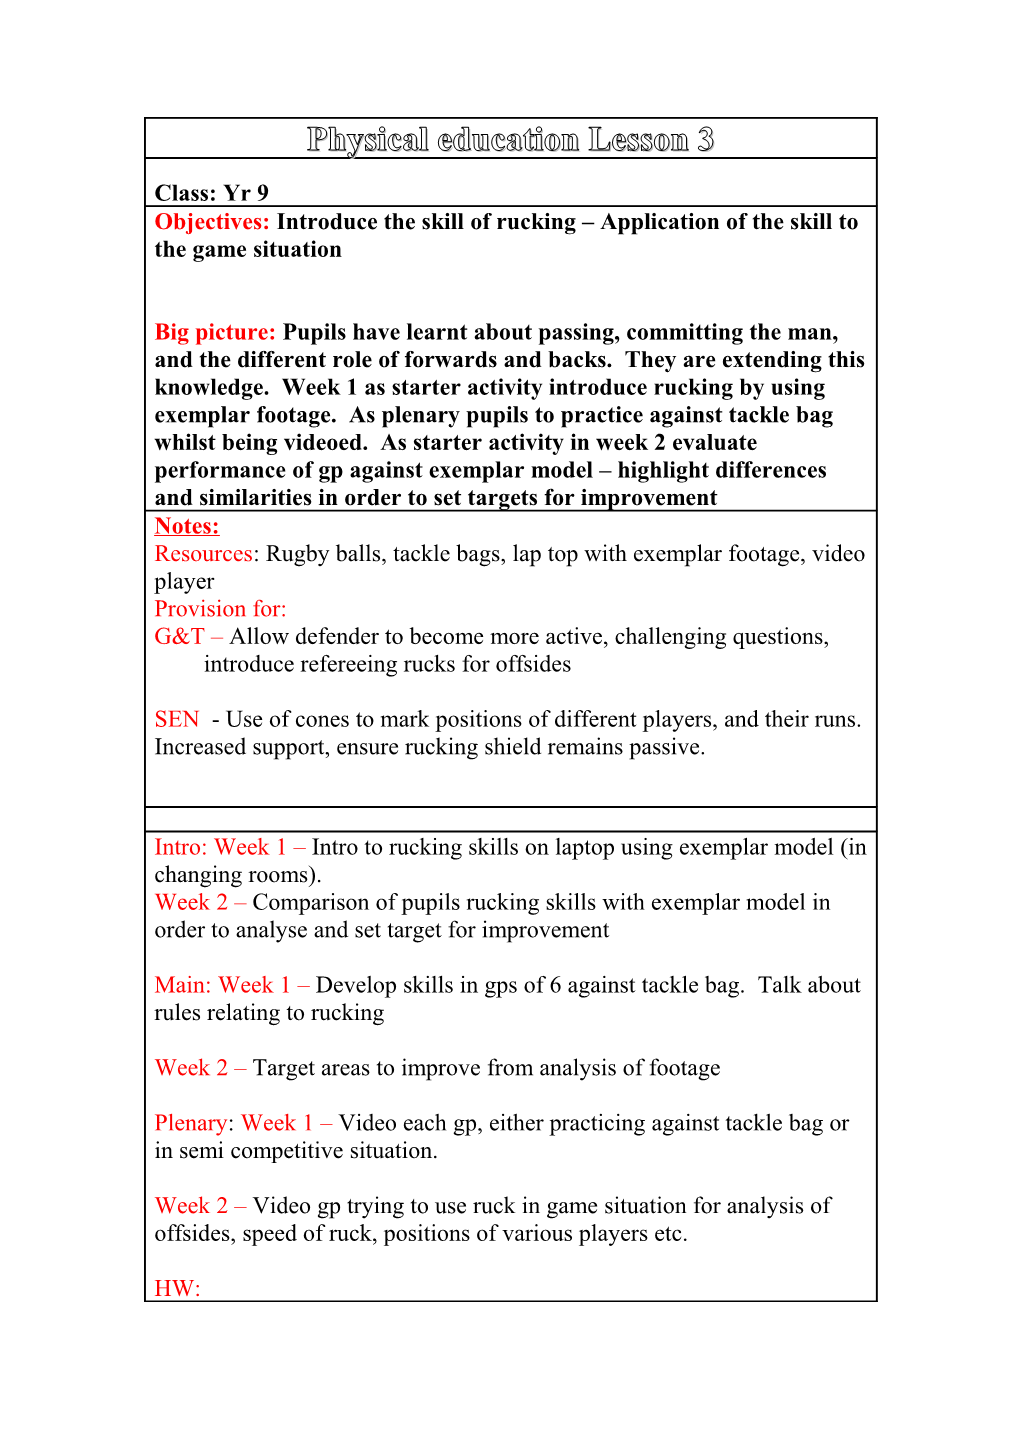 Physical Education Lesson Plan s2